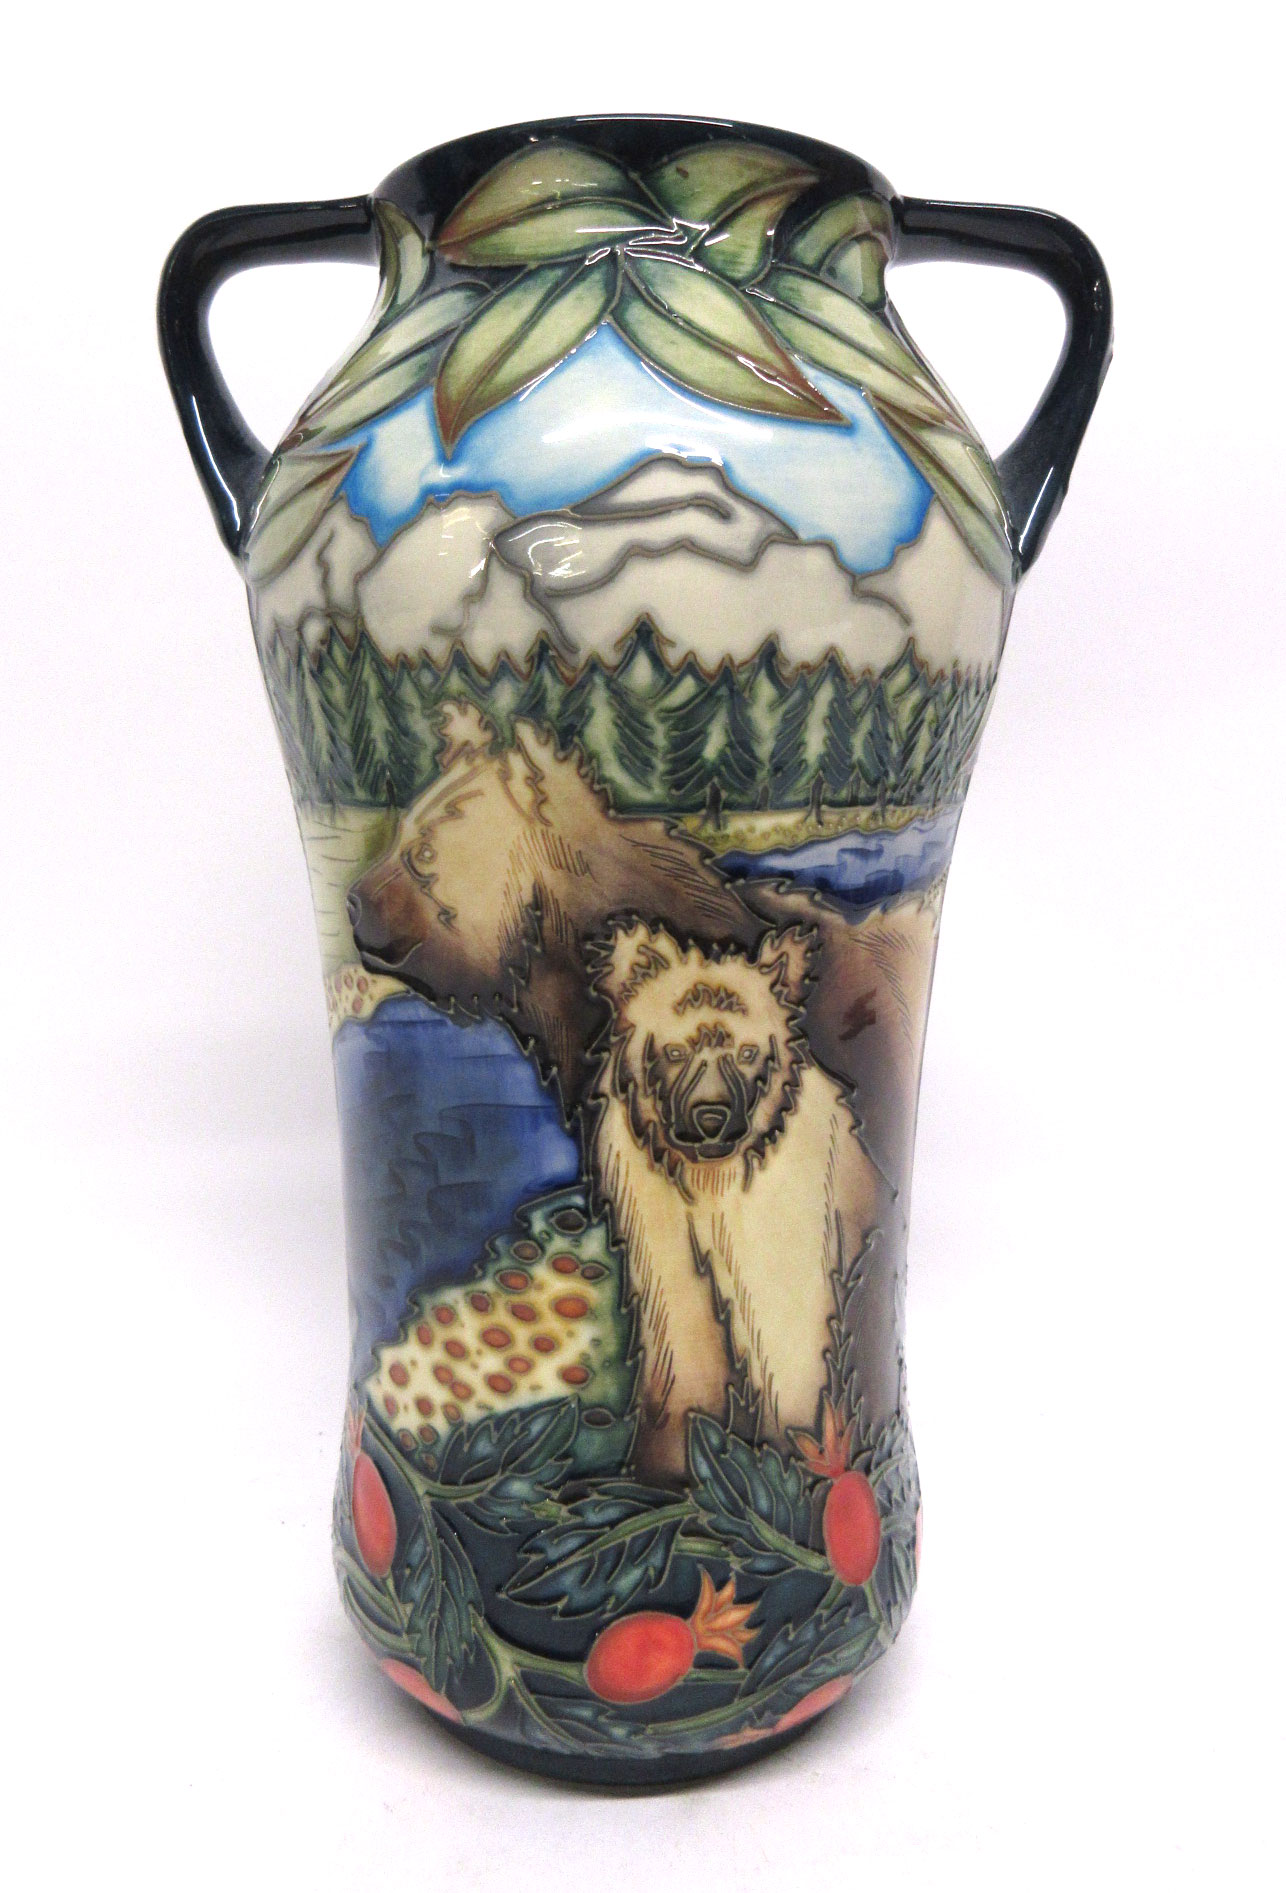 Modern Moorcroft vase in the Katmi pattern by Sian Leeper, limited edition 167/200